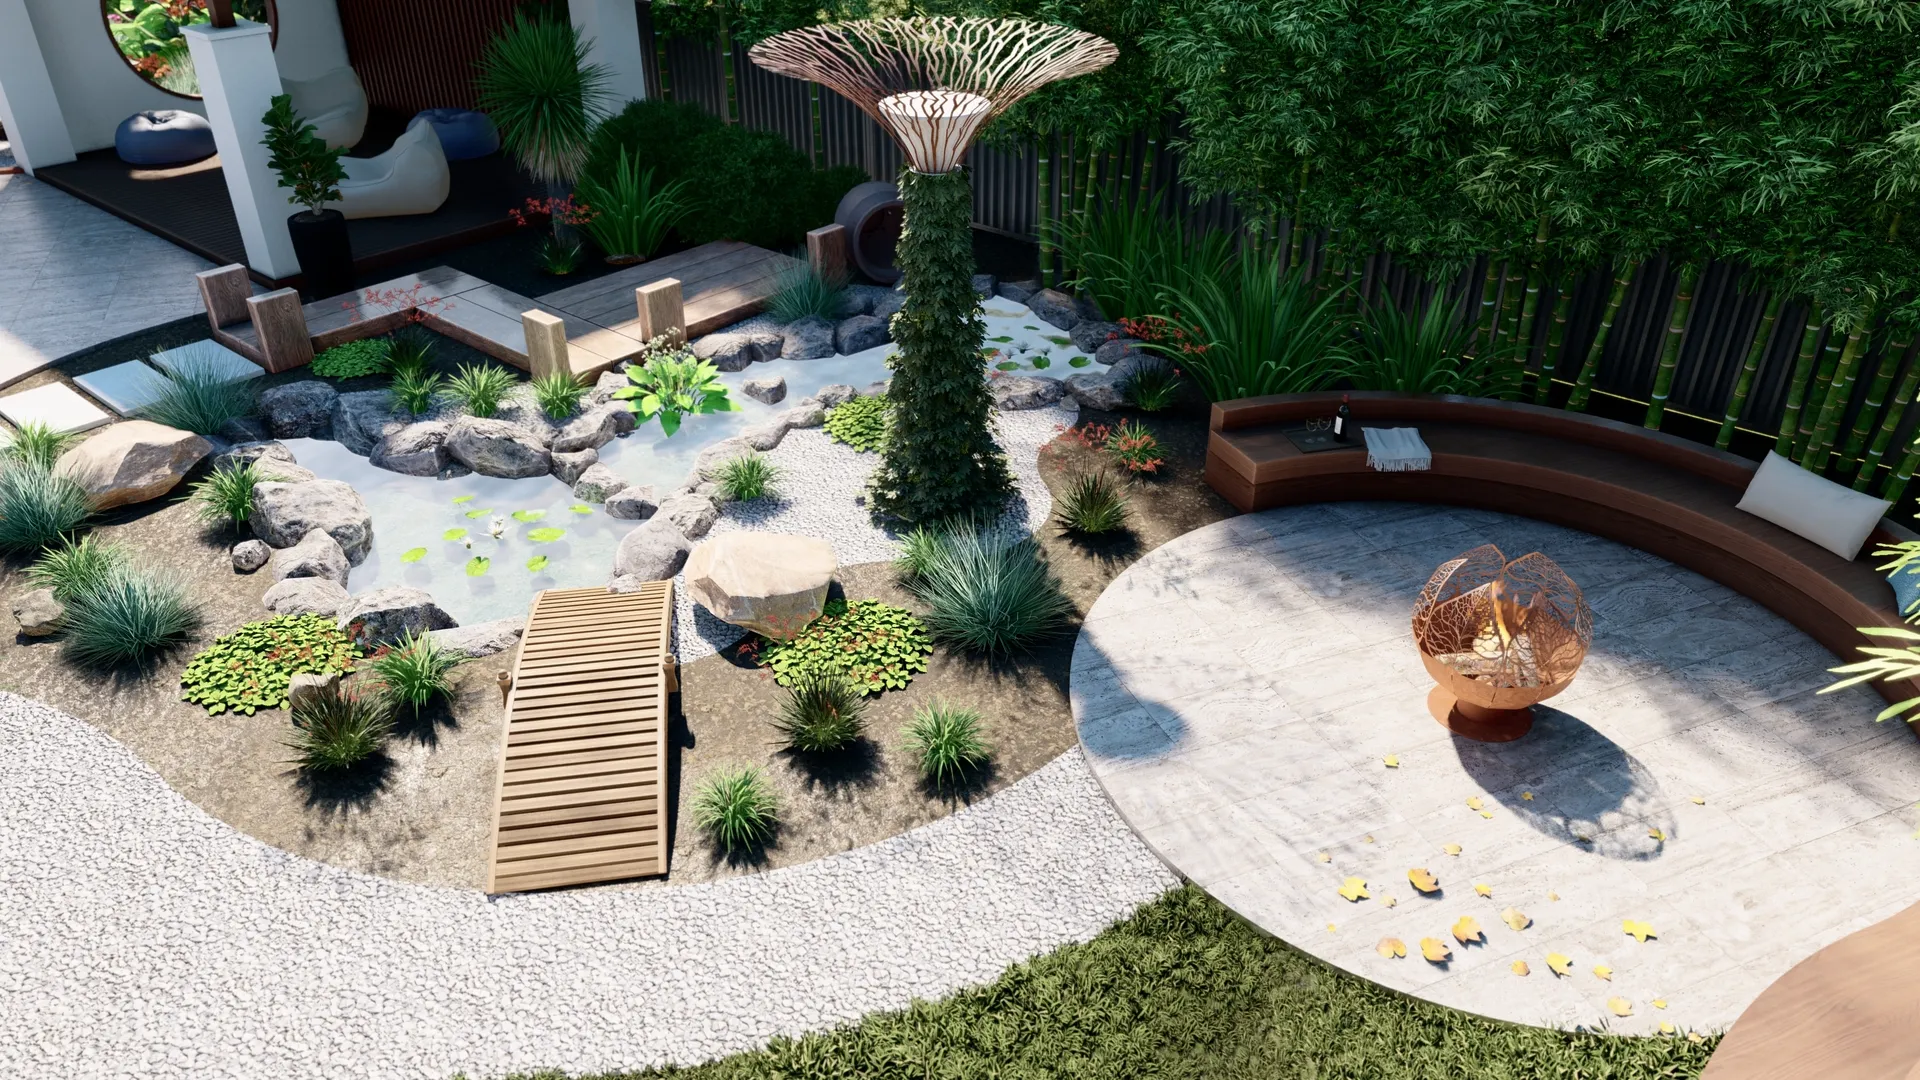 Design Scapes | Converting Neglected Outdoor Spaces Into Vibrant Patios